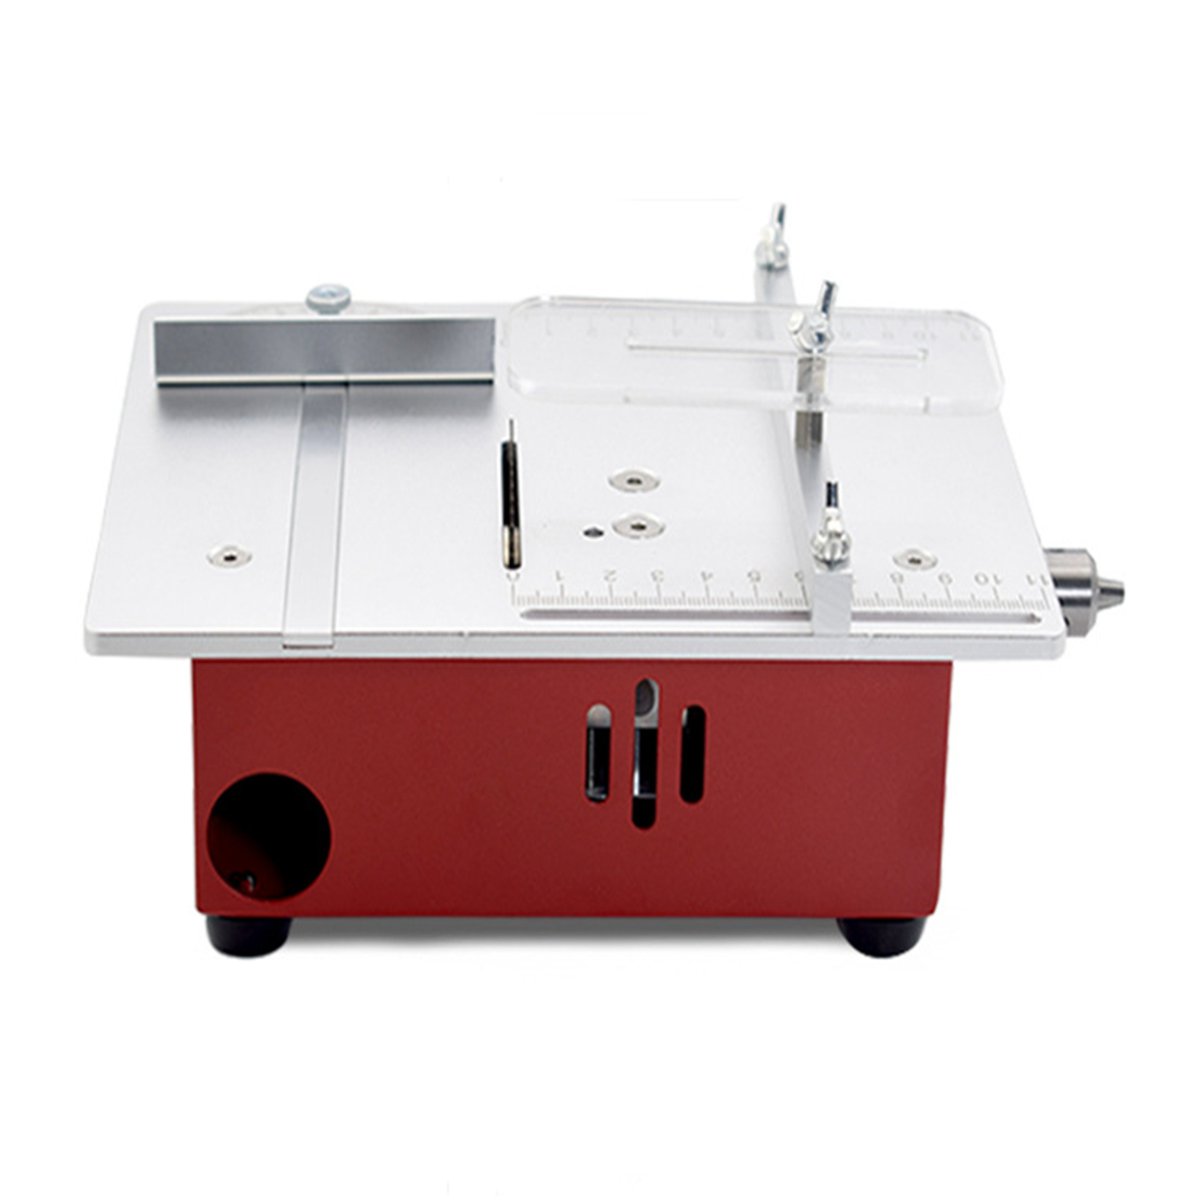 100-240V-Mini-Table-Saws-Multifunctional-Lifting-Electric-Saw-Wood-Working-DIY-Bench-Lathe-Electric--1764587